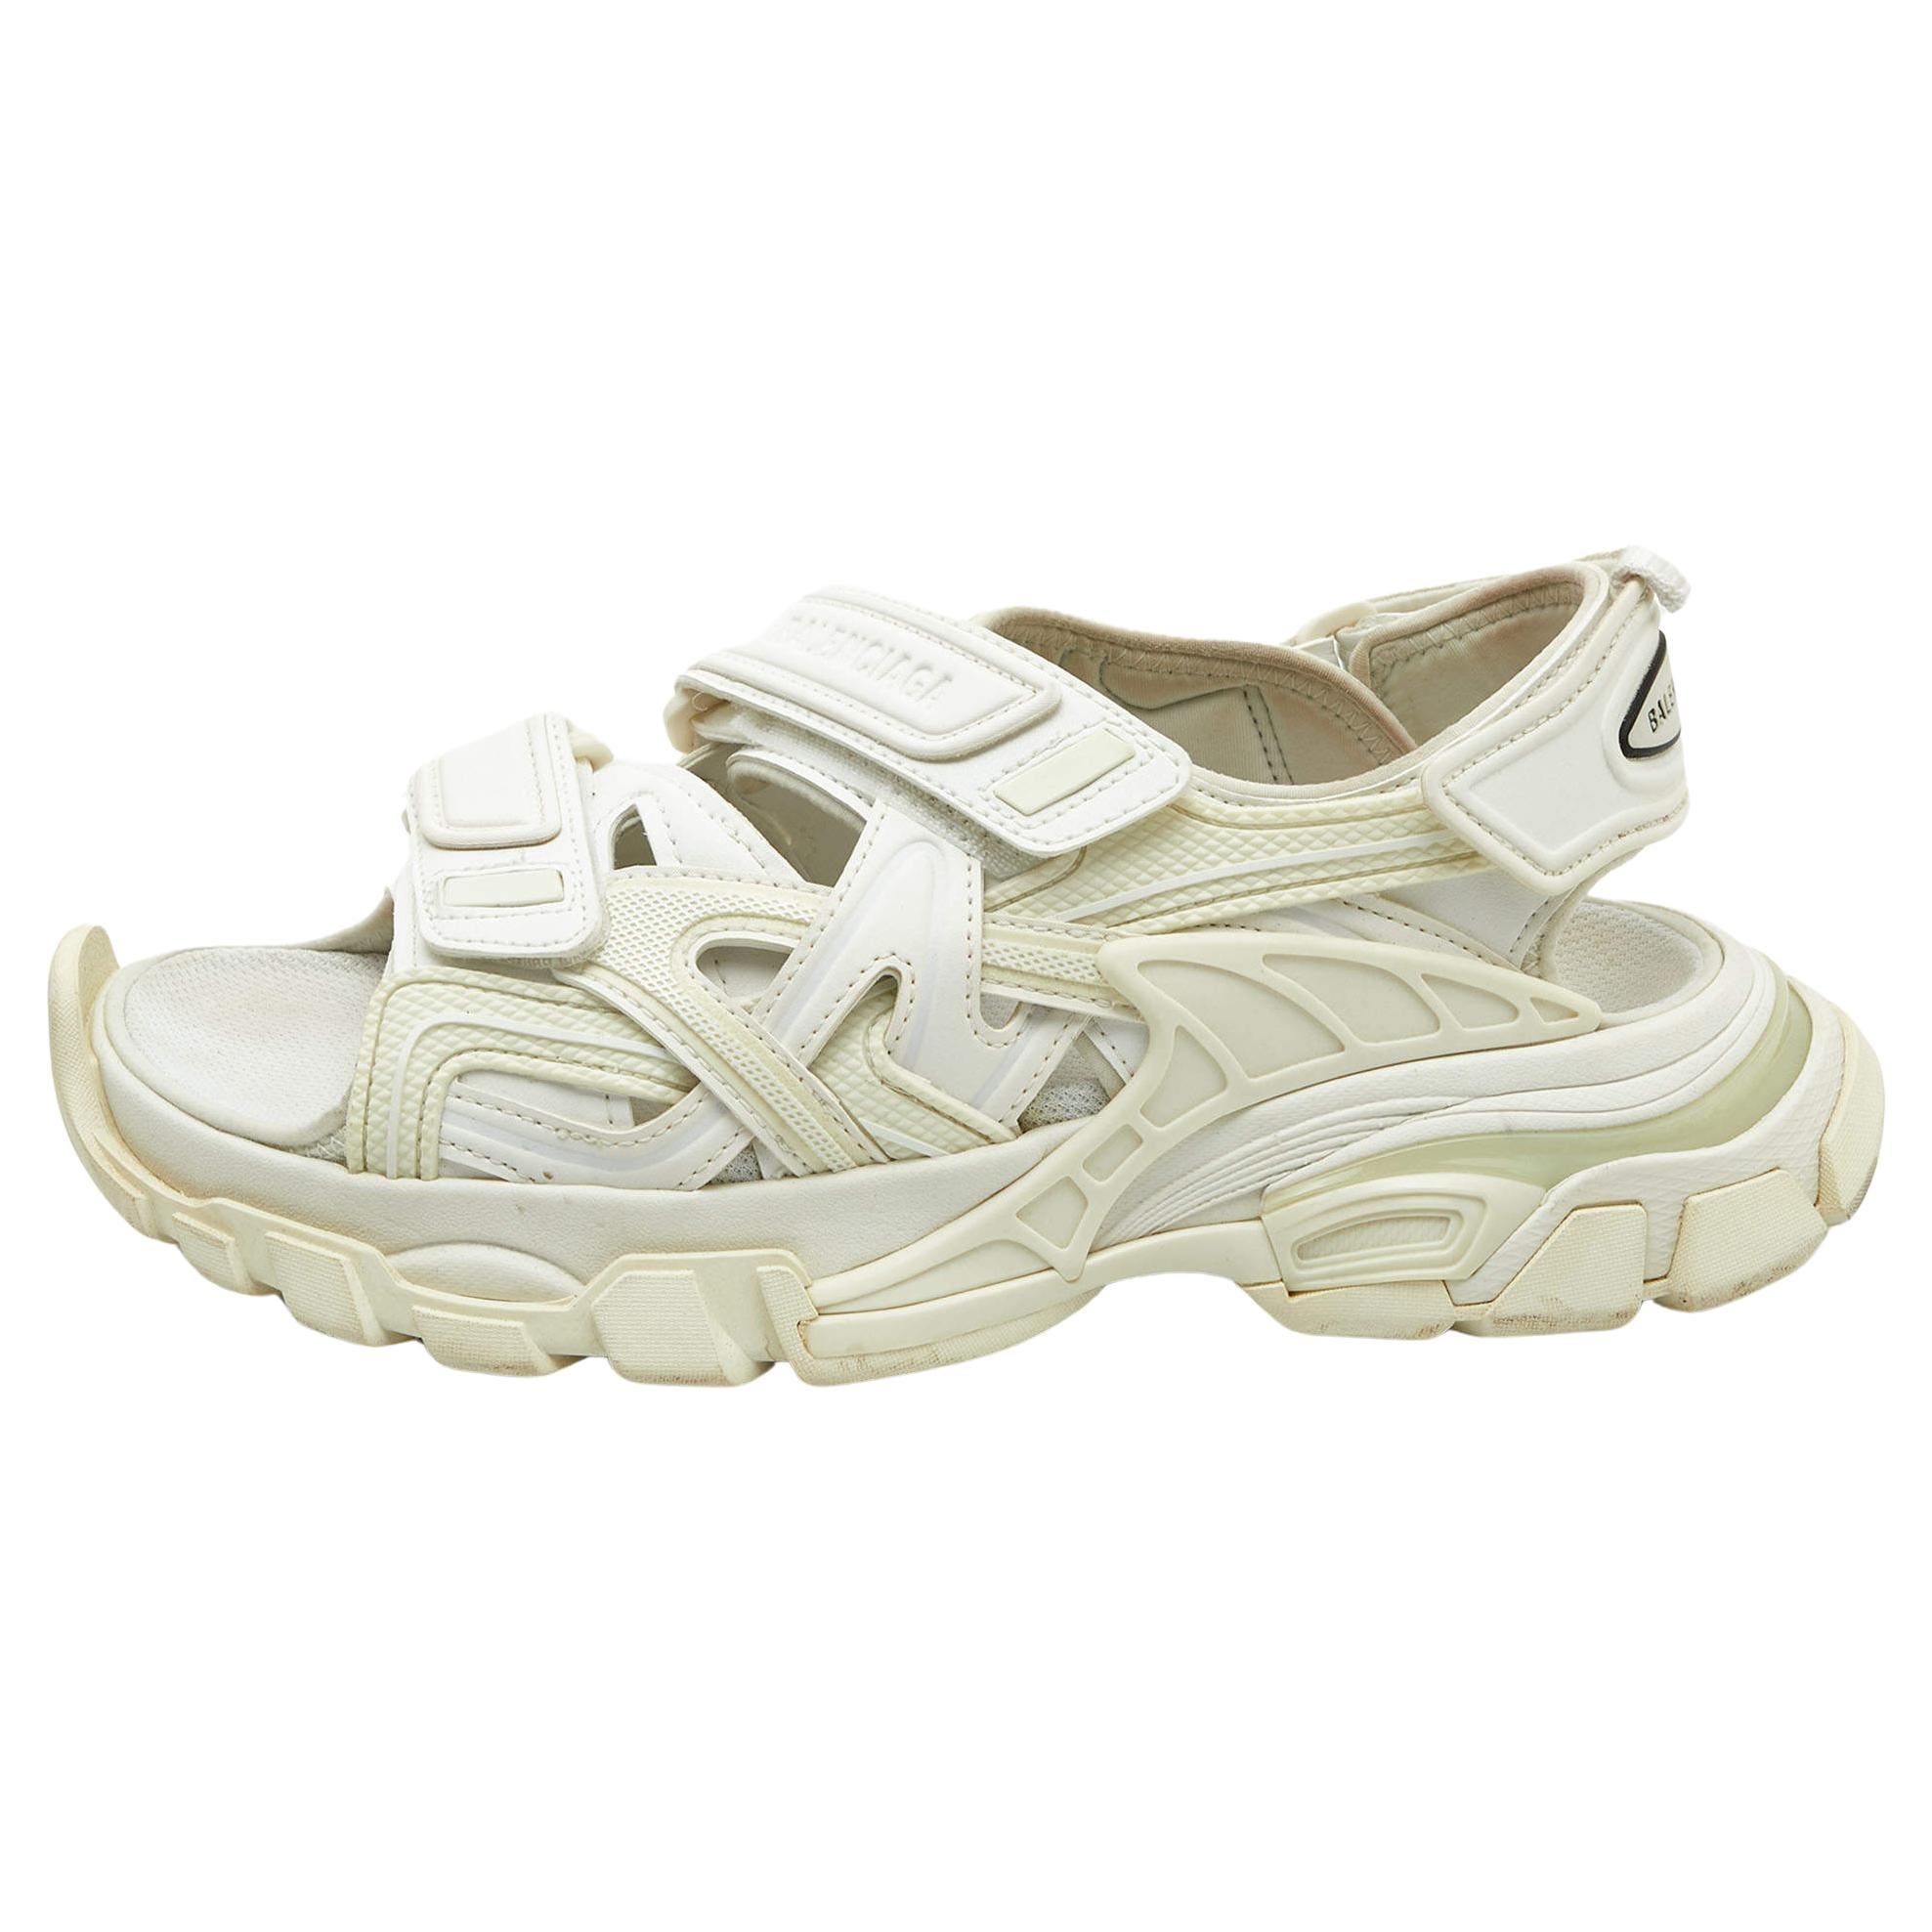 Balenciaga White Rubber and Faux Leather Track Sandals 